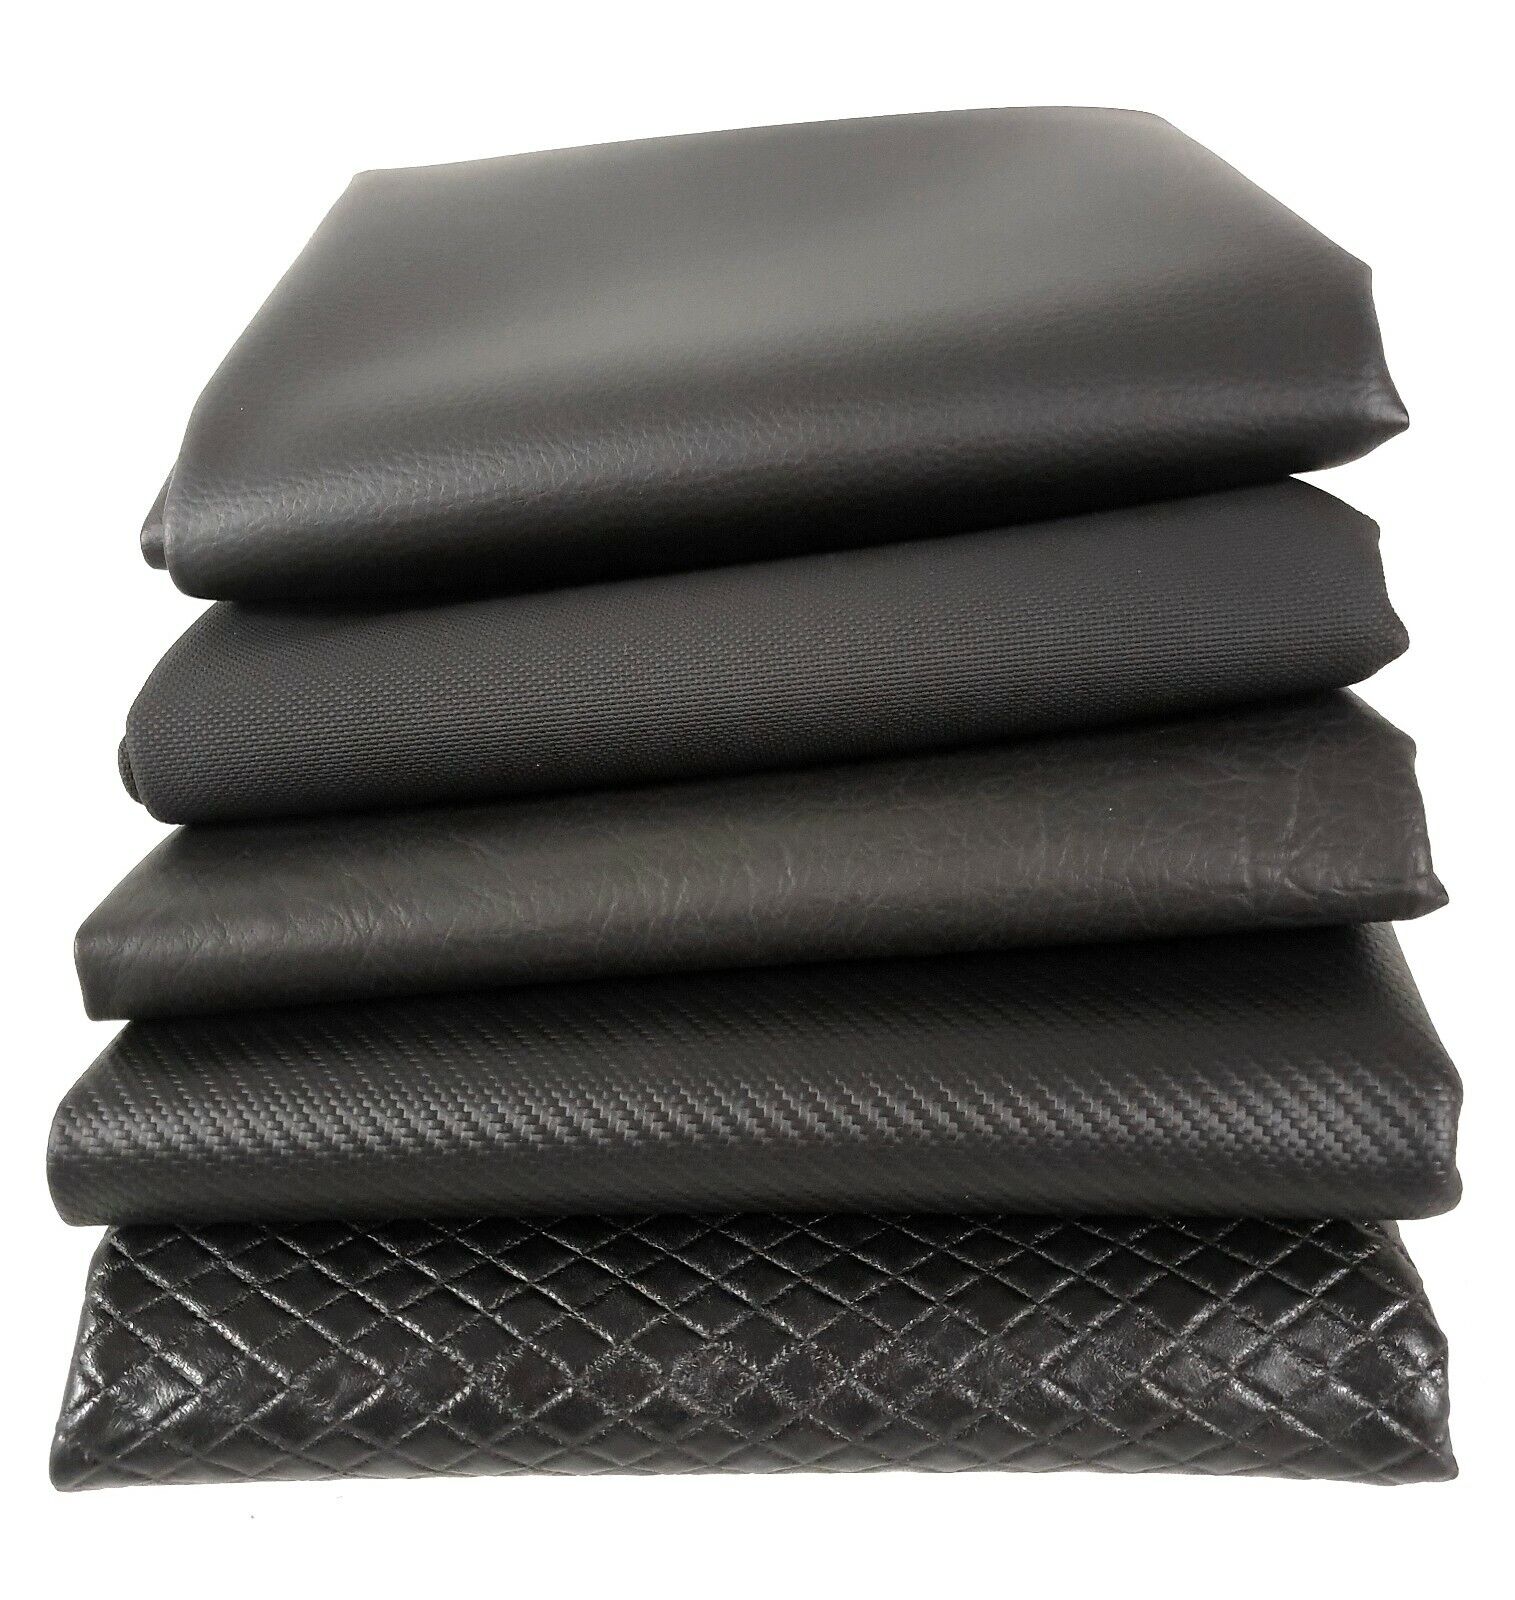 Seat cover exclusive universal covers 70 x 100 cm motorcycle scooter seat cover